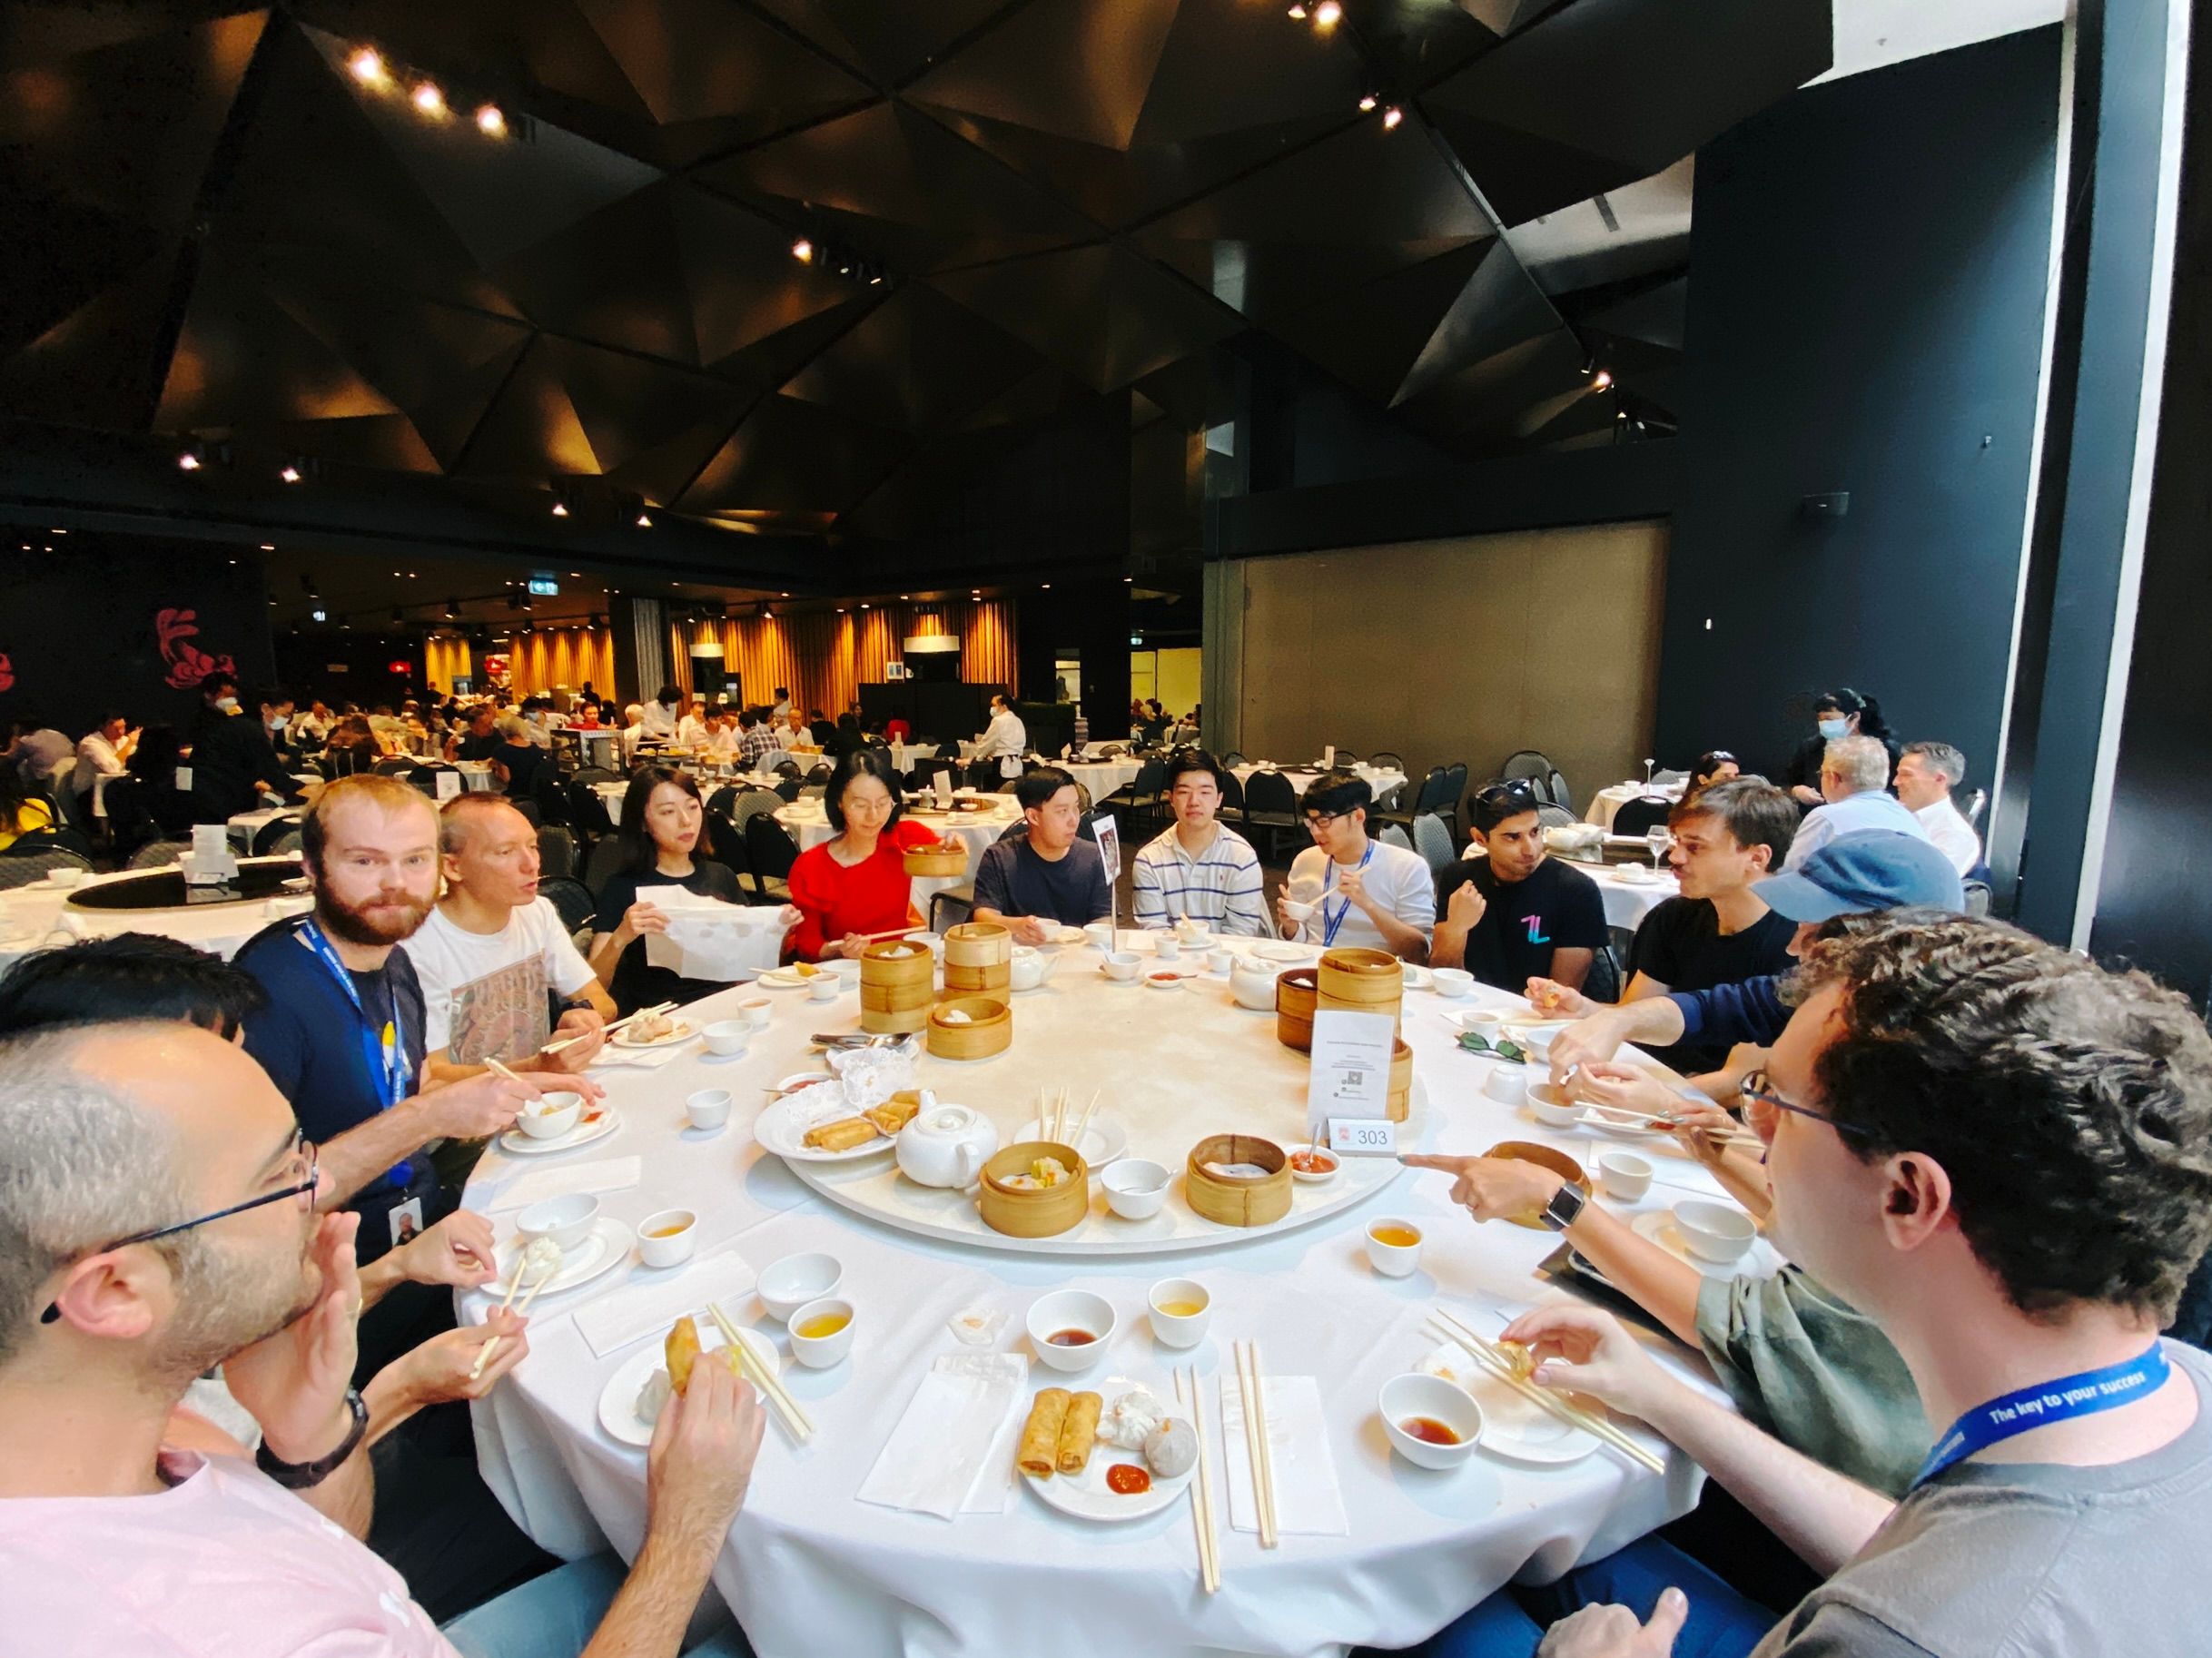 A wide-angle photo taken of a big round table with people sitting all around it and lots of food in the middle. I think yum cha is called dim sum in the US?